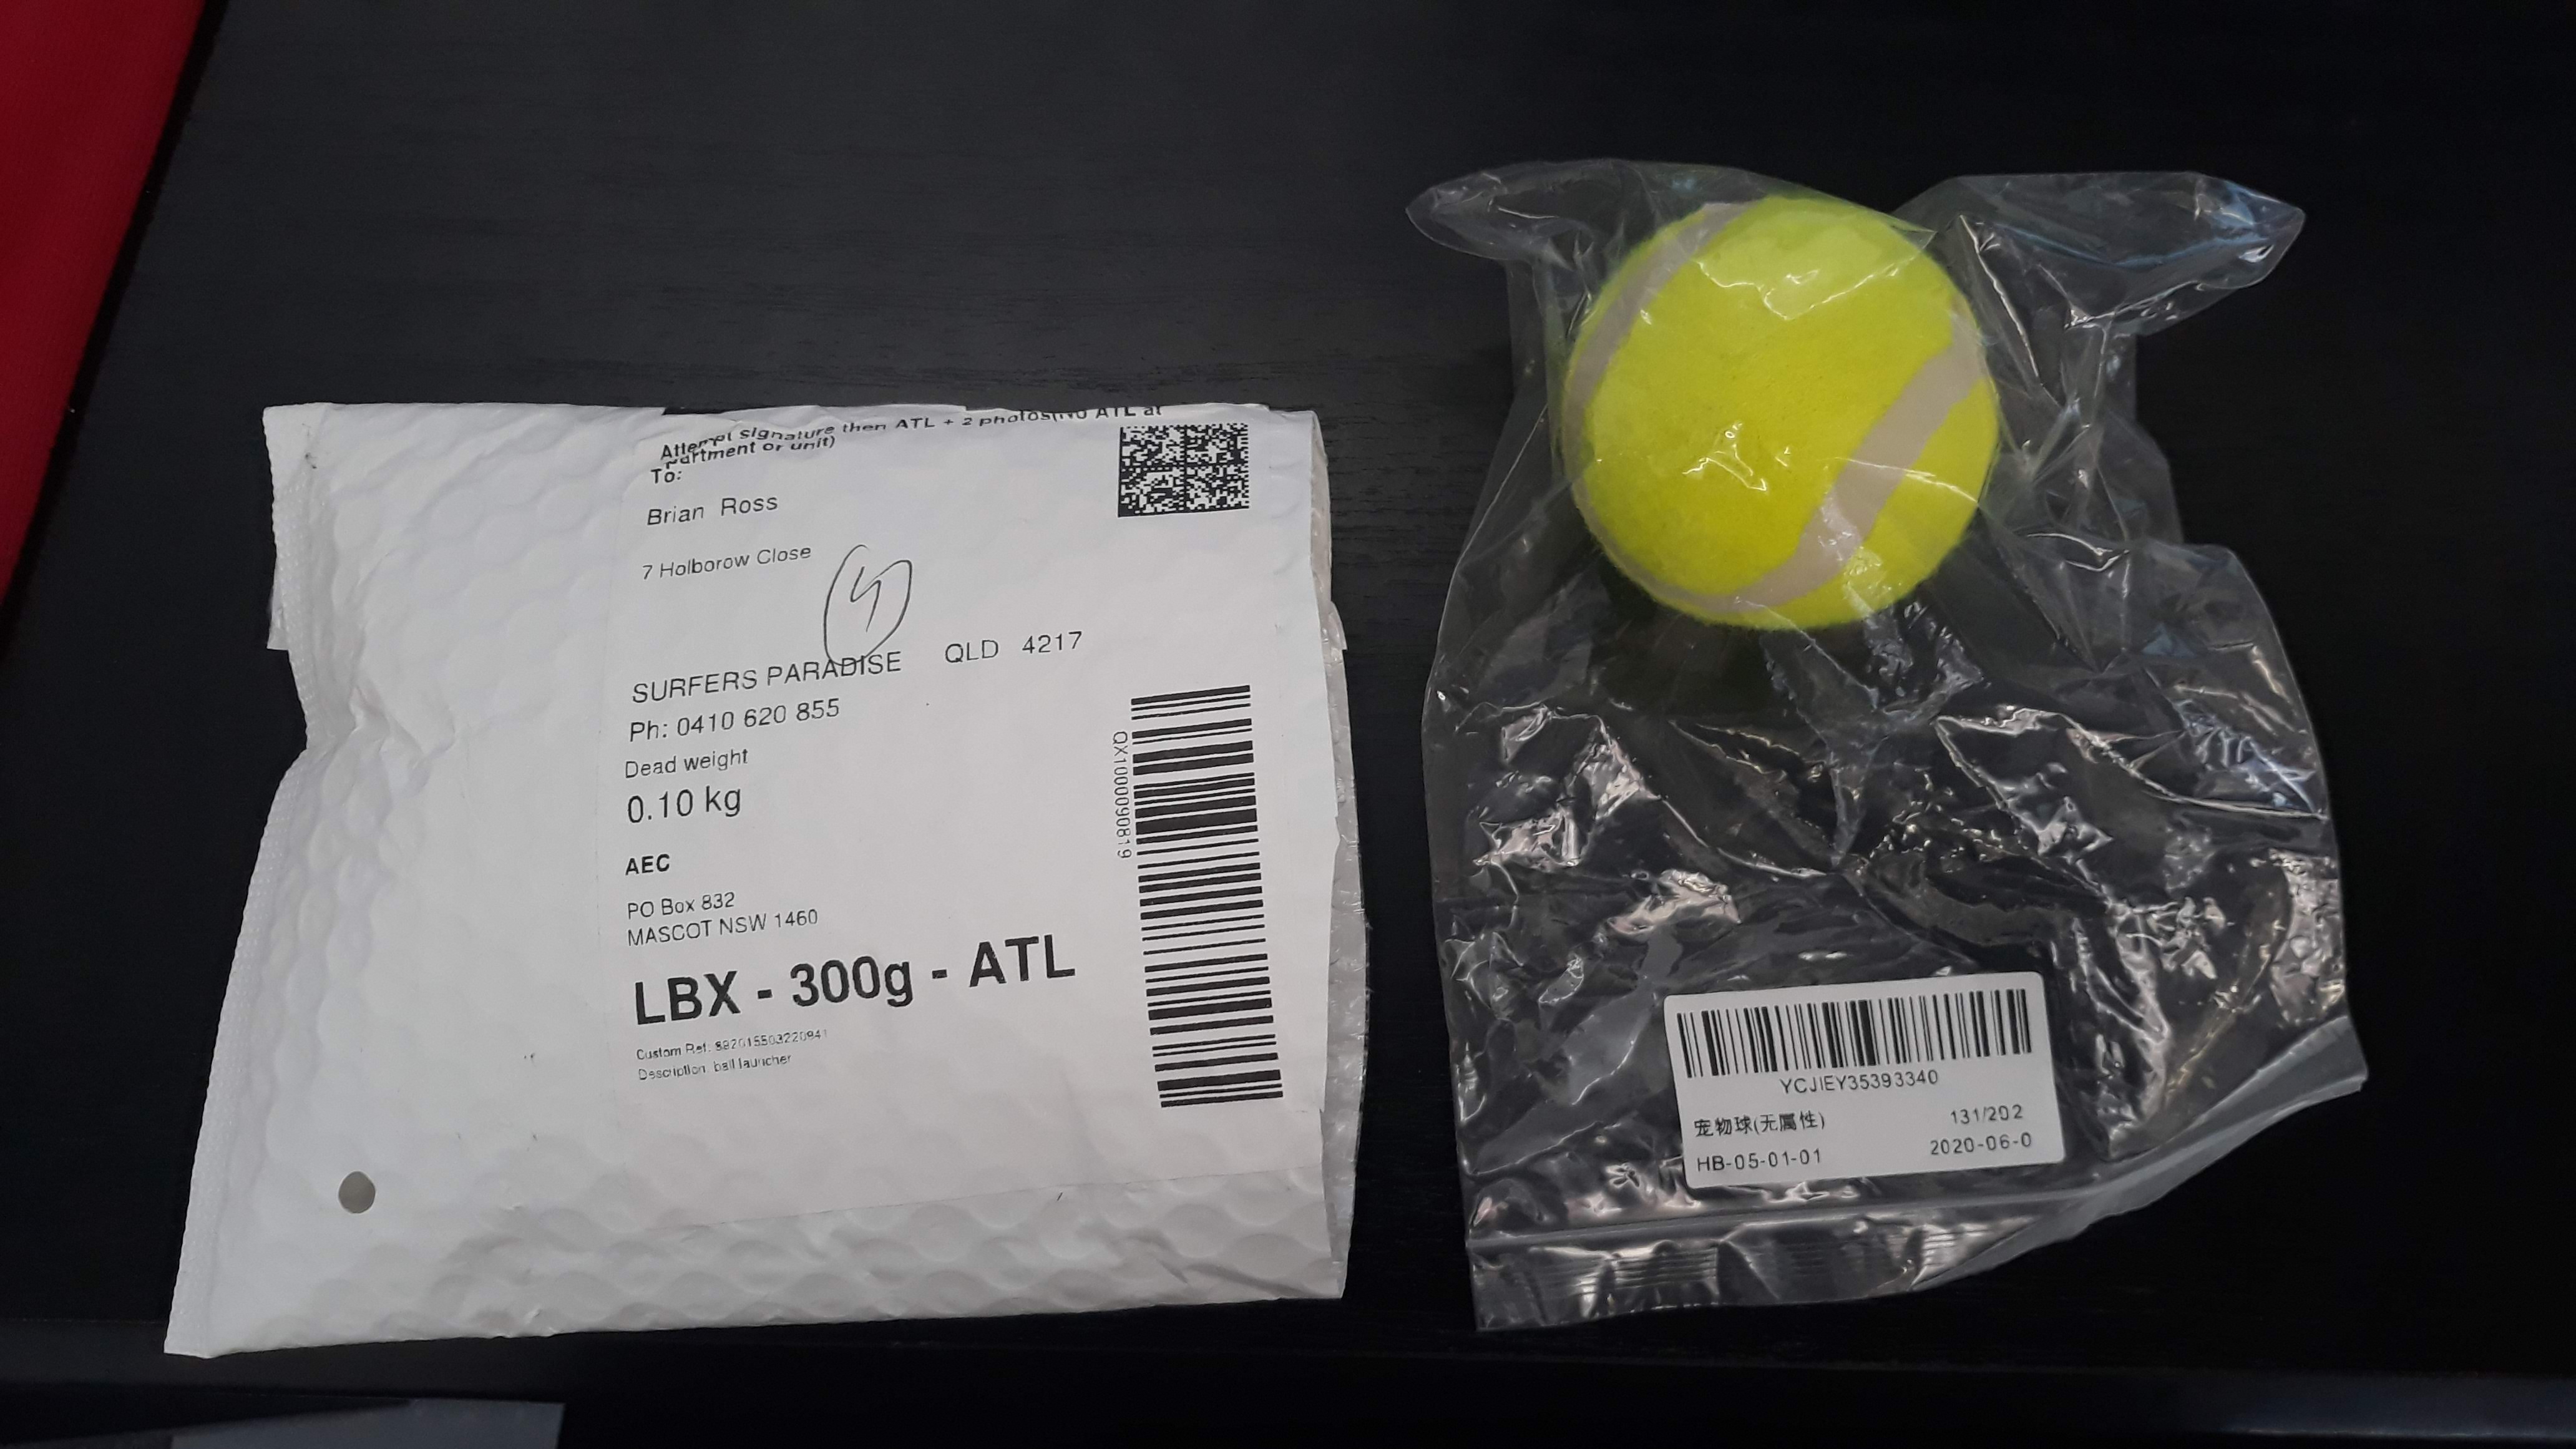 Ball posted from Australia